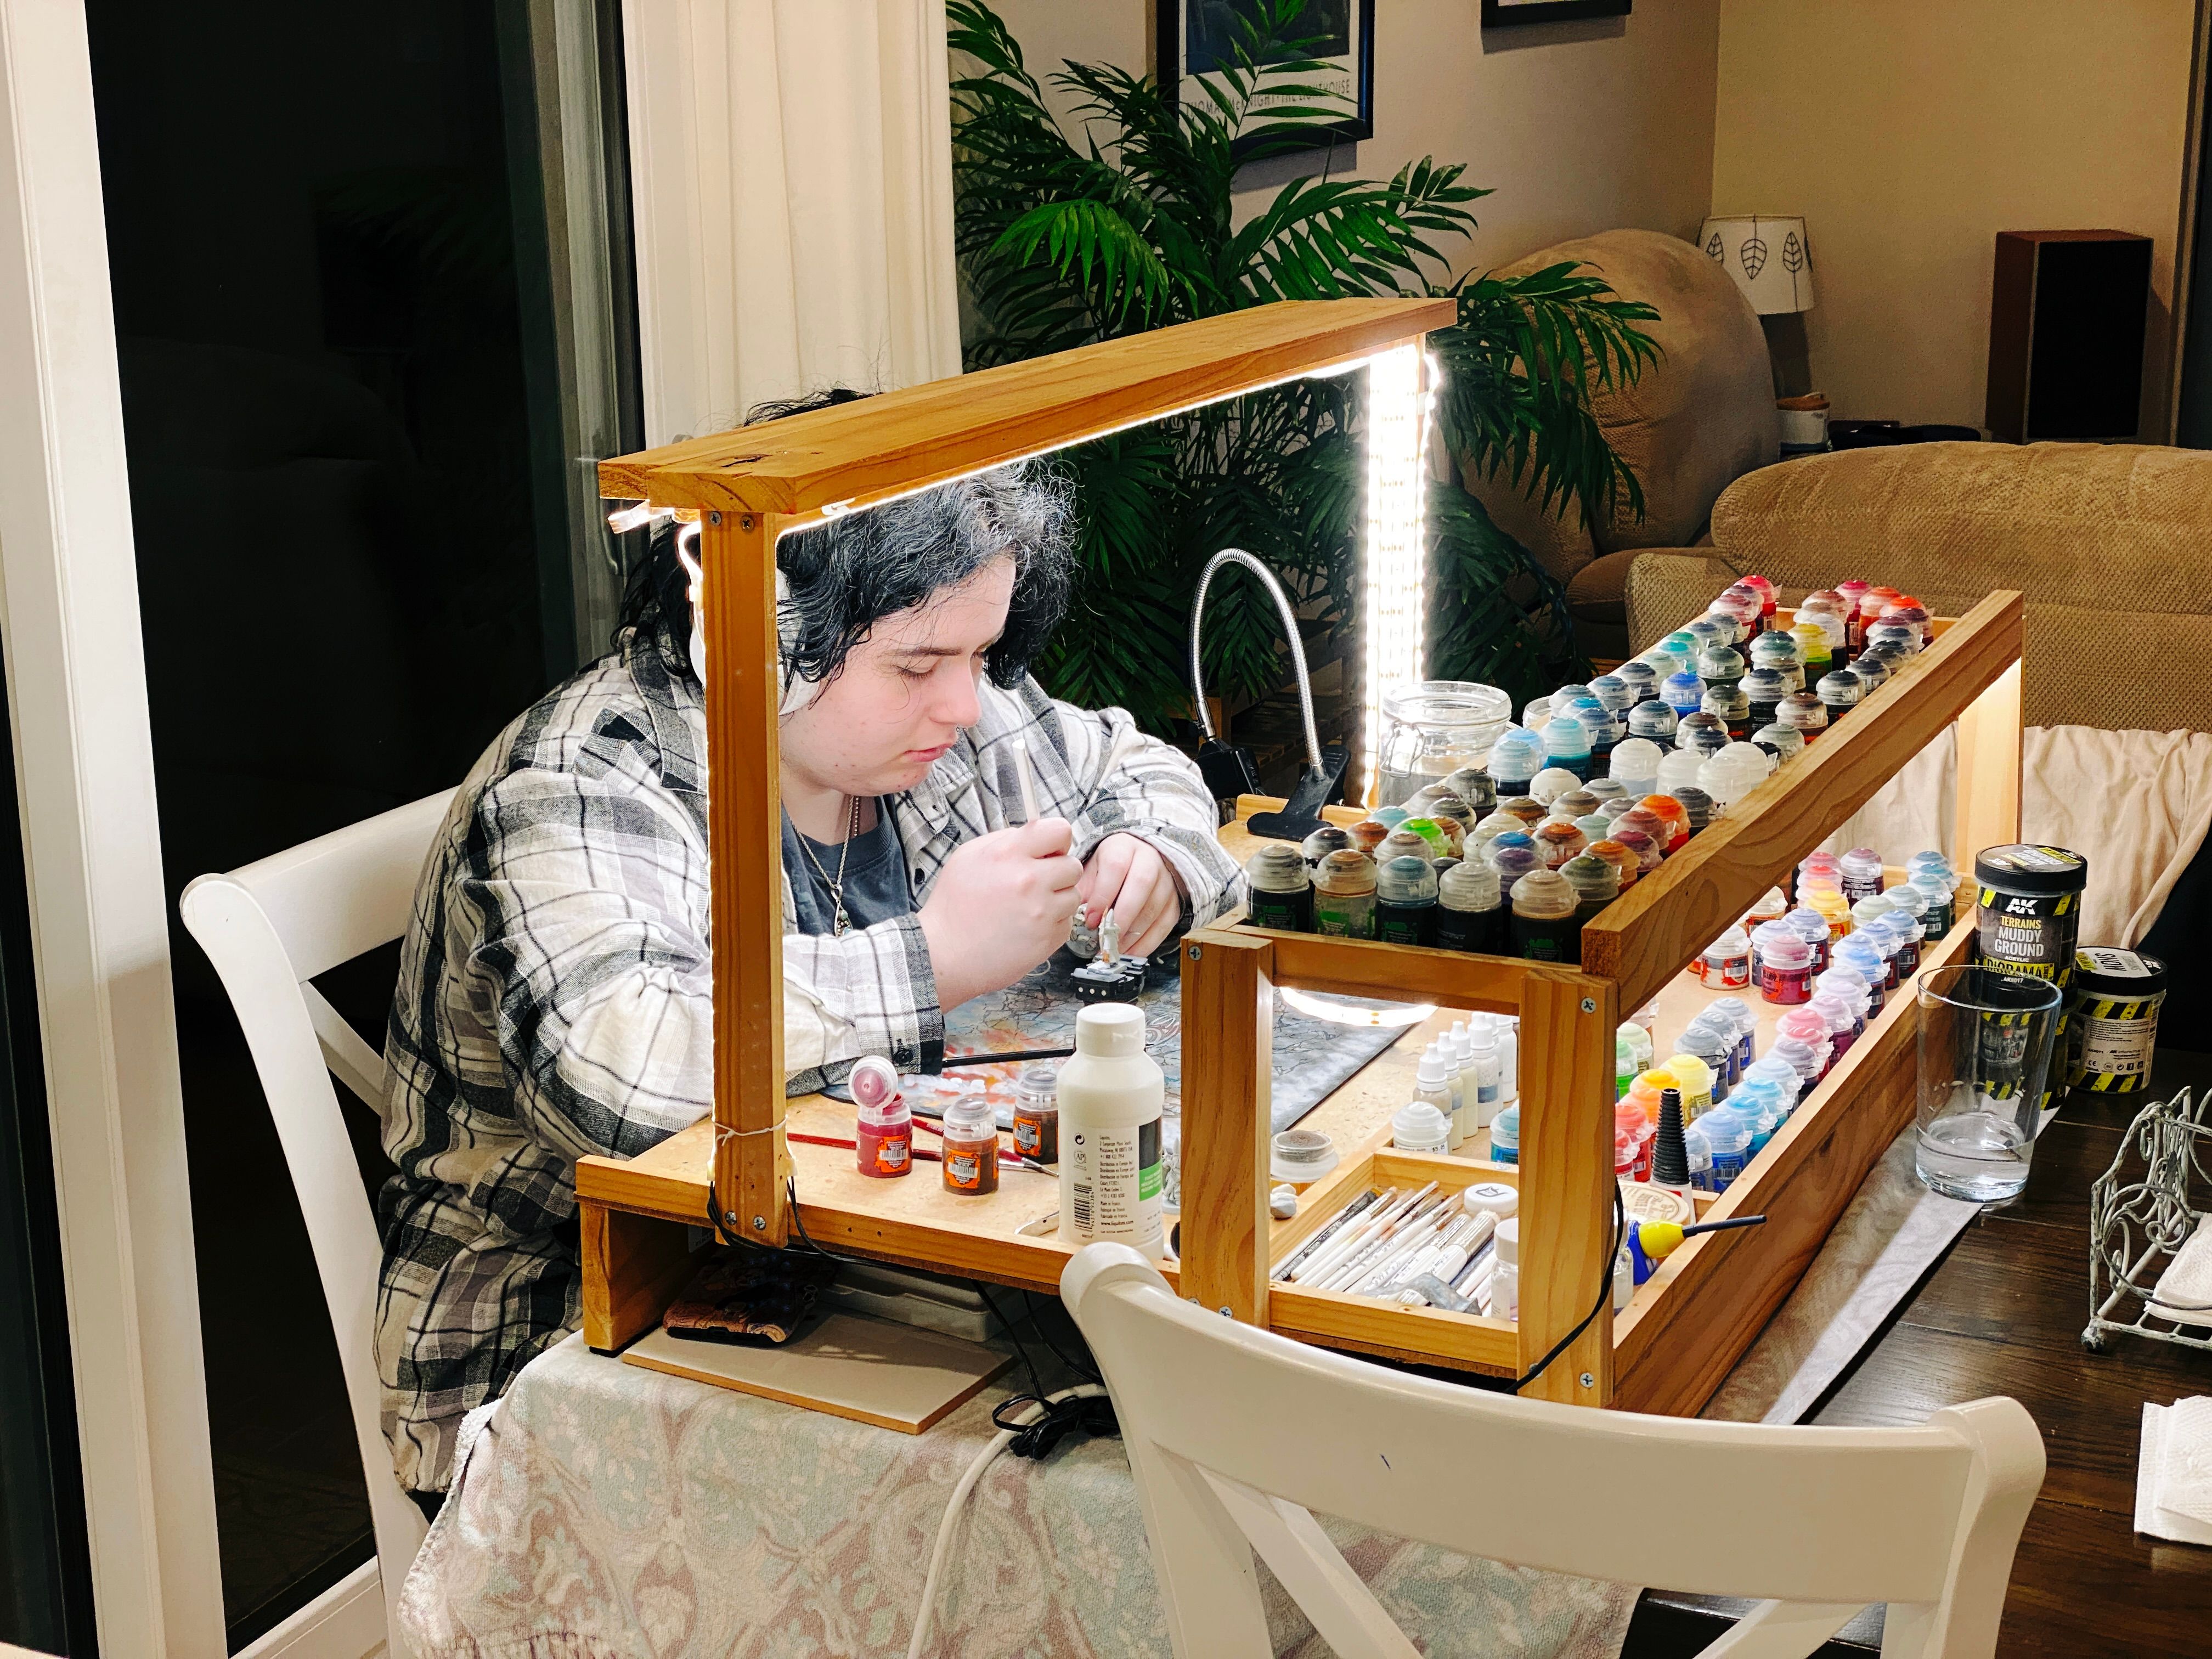 A photo of a white non-binary person with black hair and white headphones on, holding a paintbrush and intently looking at the miniature they're painting. They're sitting at my painting table which has a wooden arch with LED strip lighting in the middle, and two levels of storage for my many many paint pots.